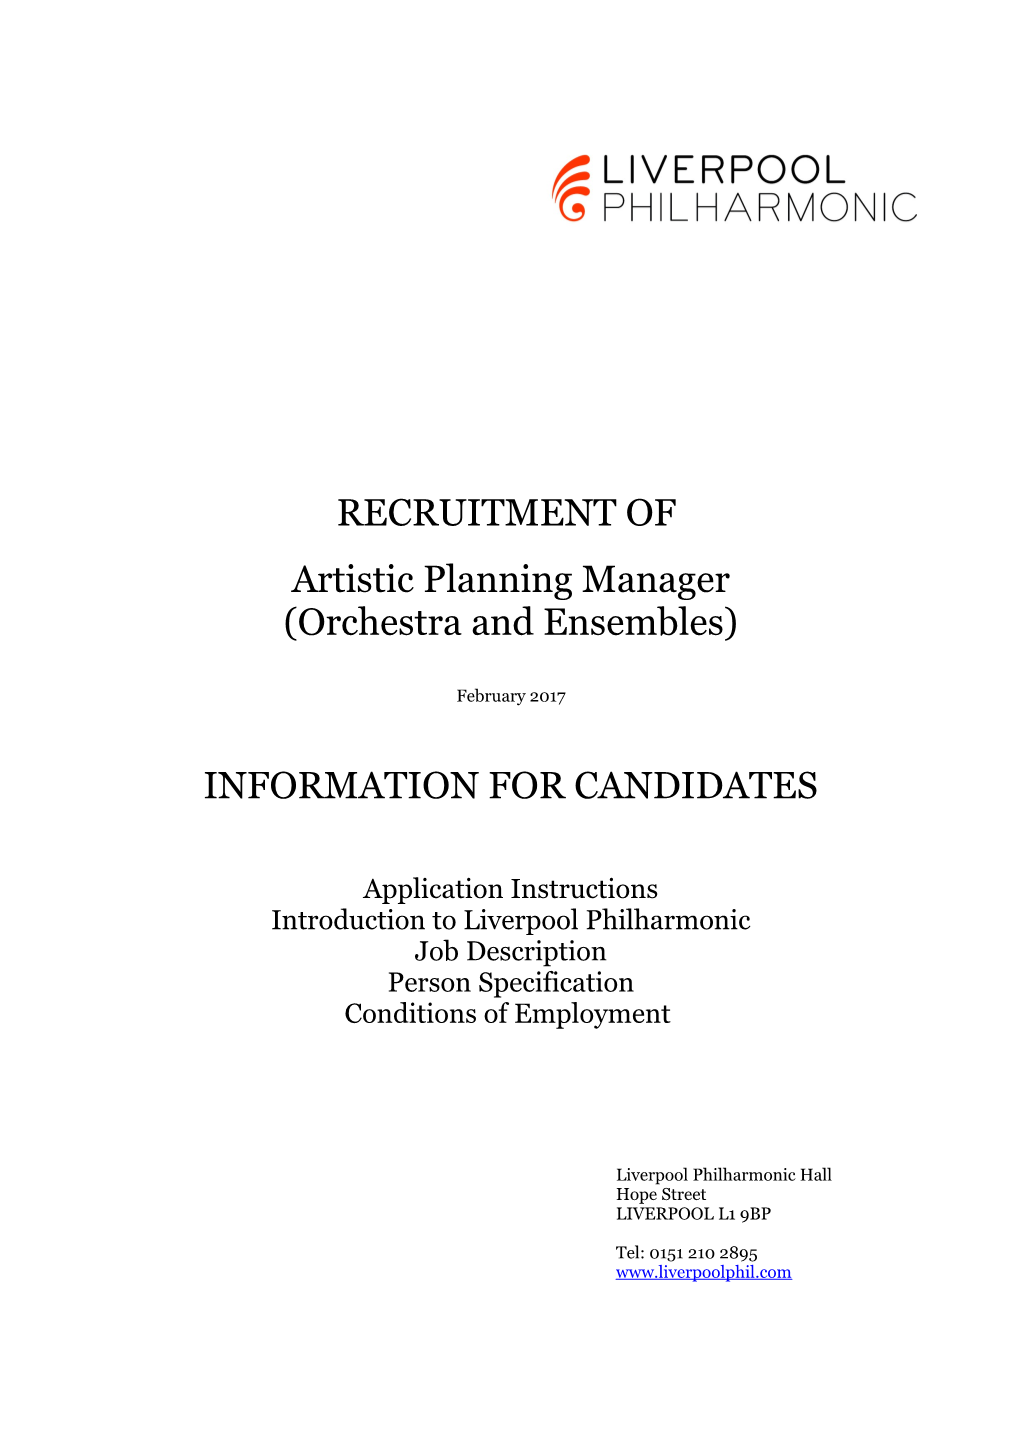 Artistic Planning Manager